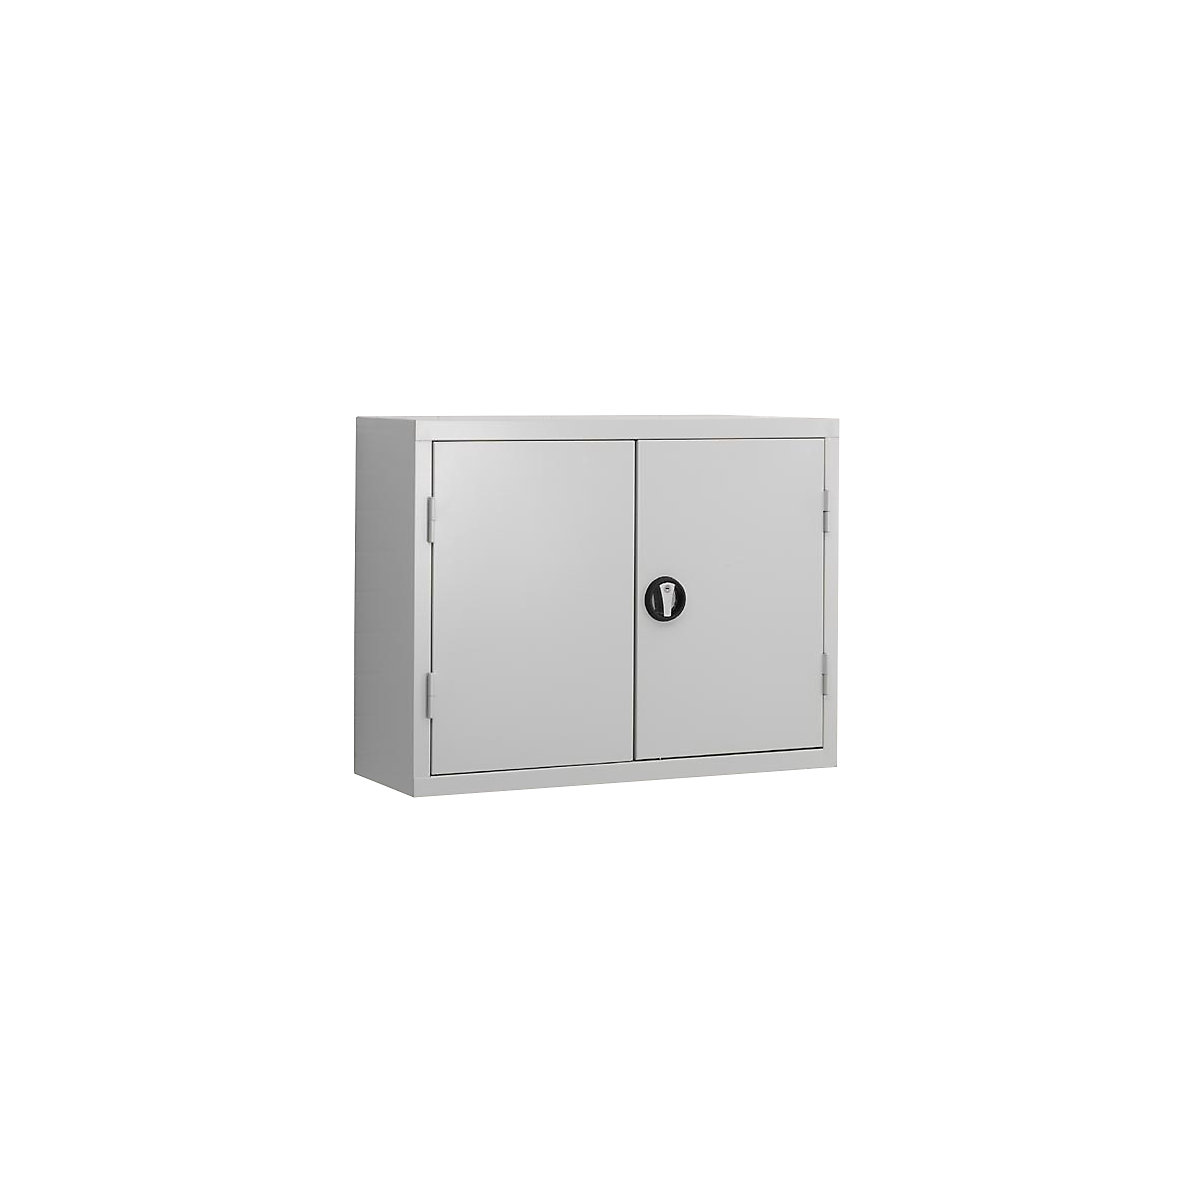 Wall mounted tool cupboard, perforated inside door panels, light grey RAL 7035-5